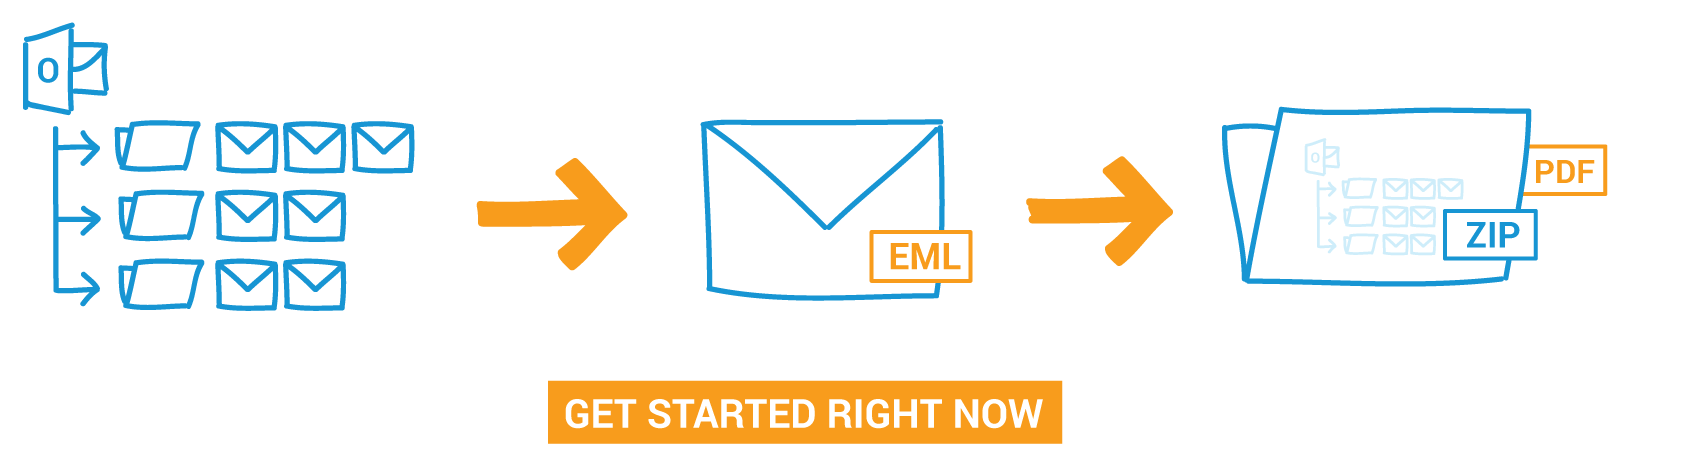 Eml e-mail files converted to PDF